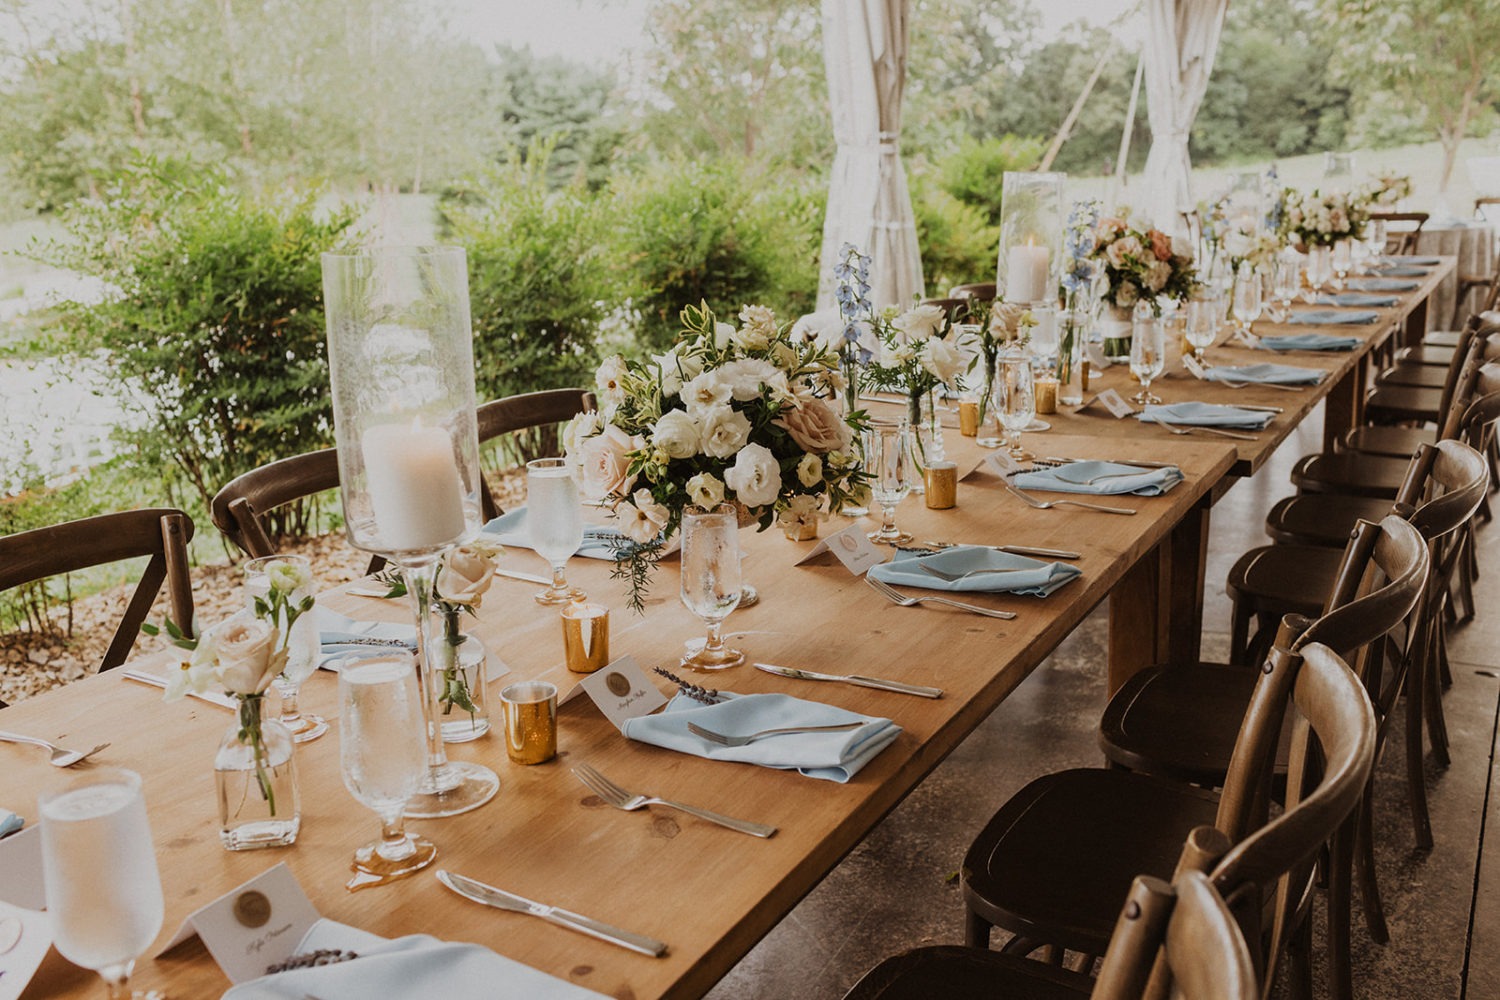 floral table settings at tented wedding reception